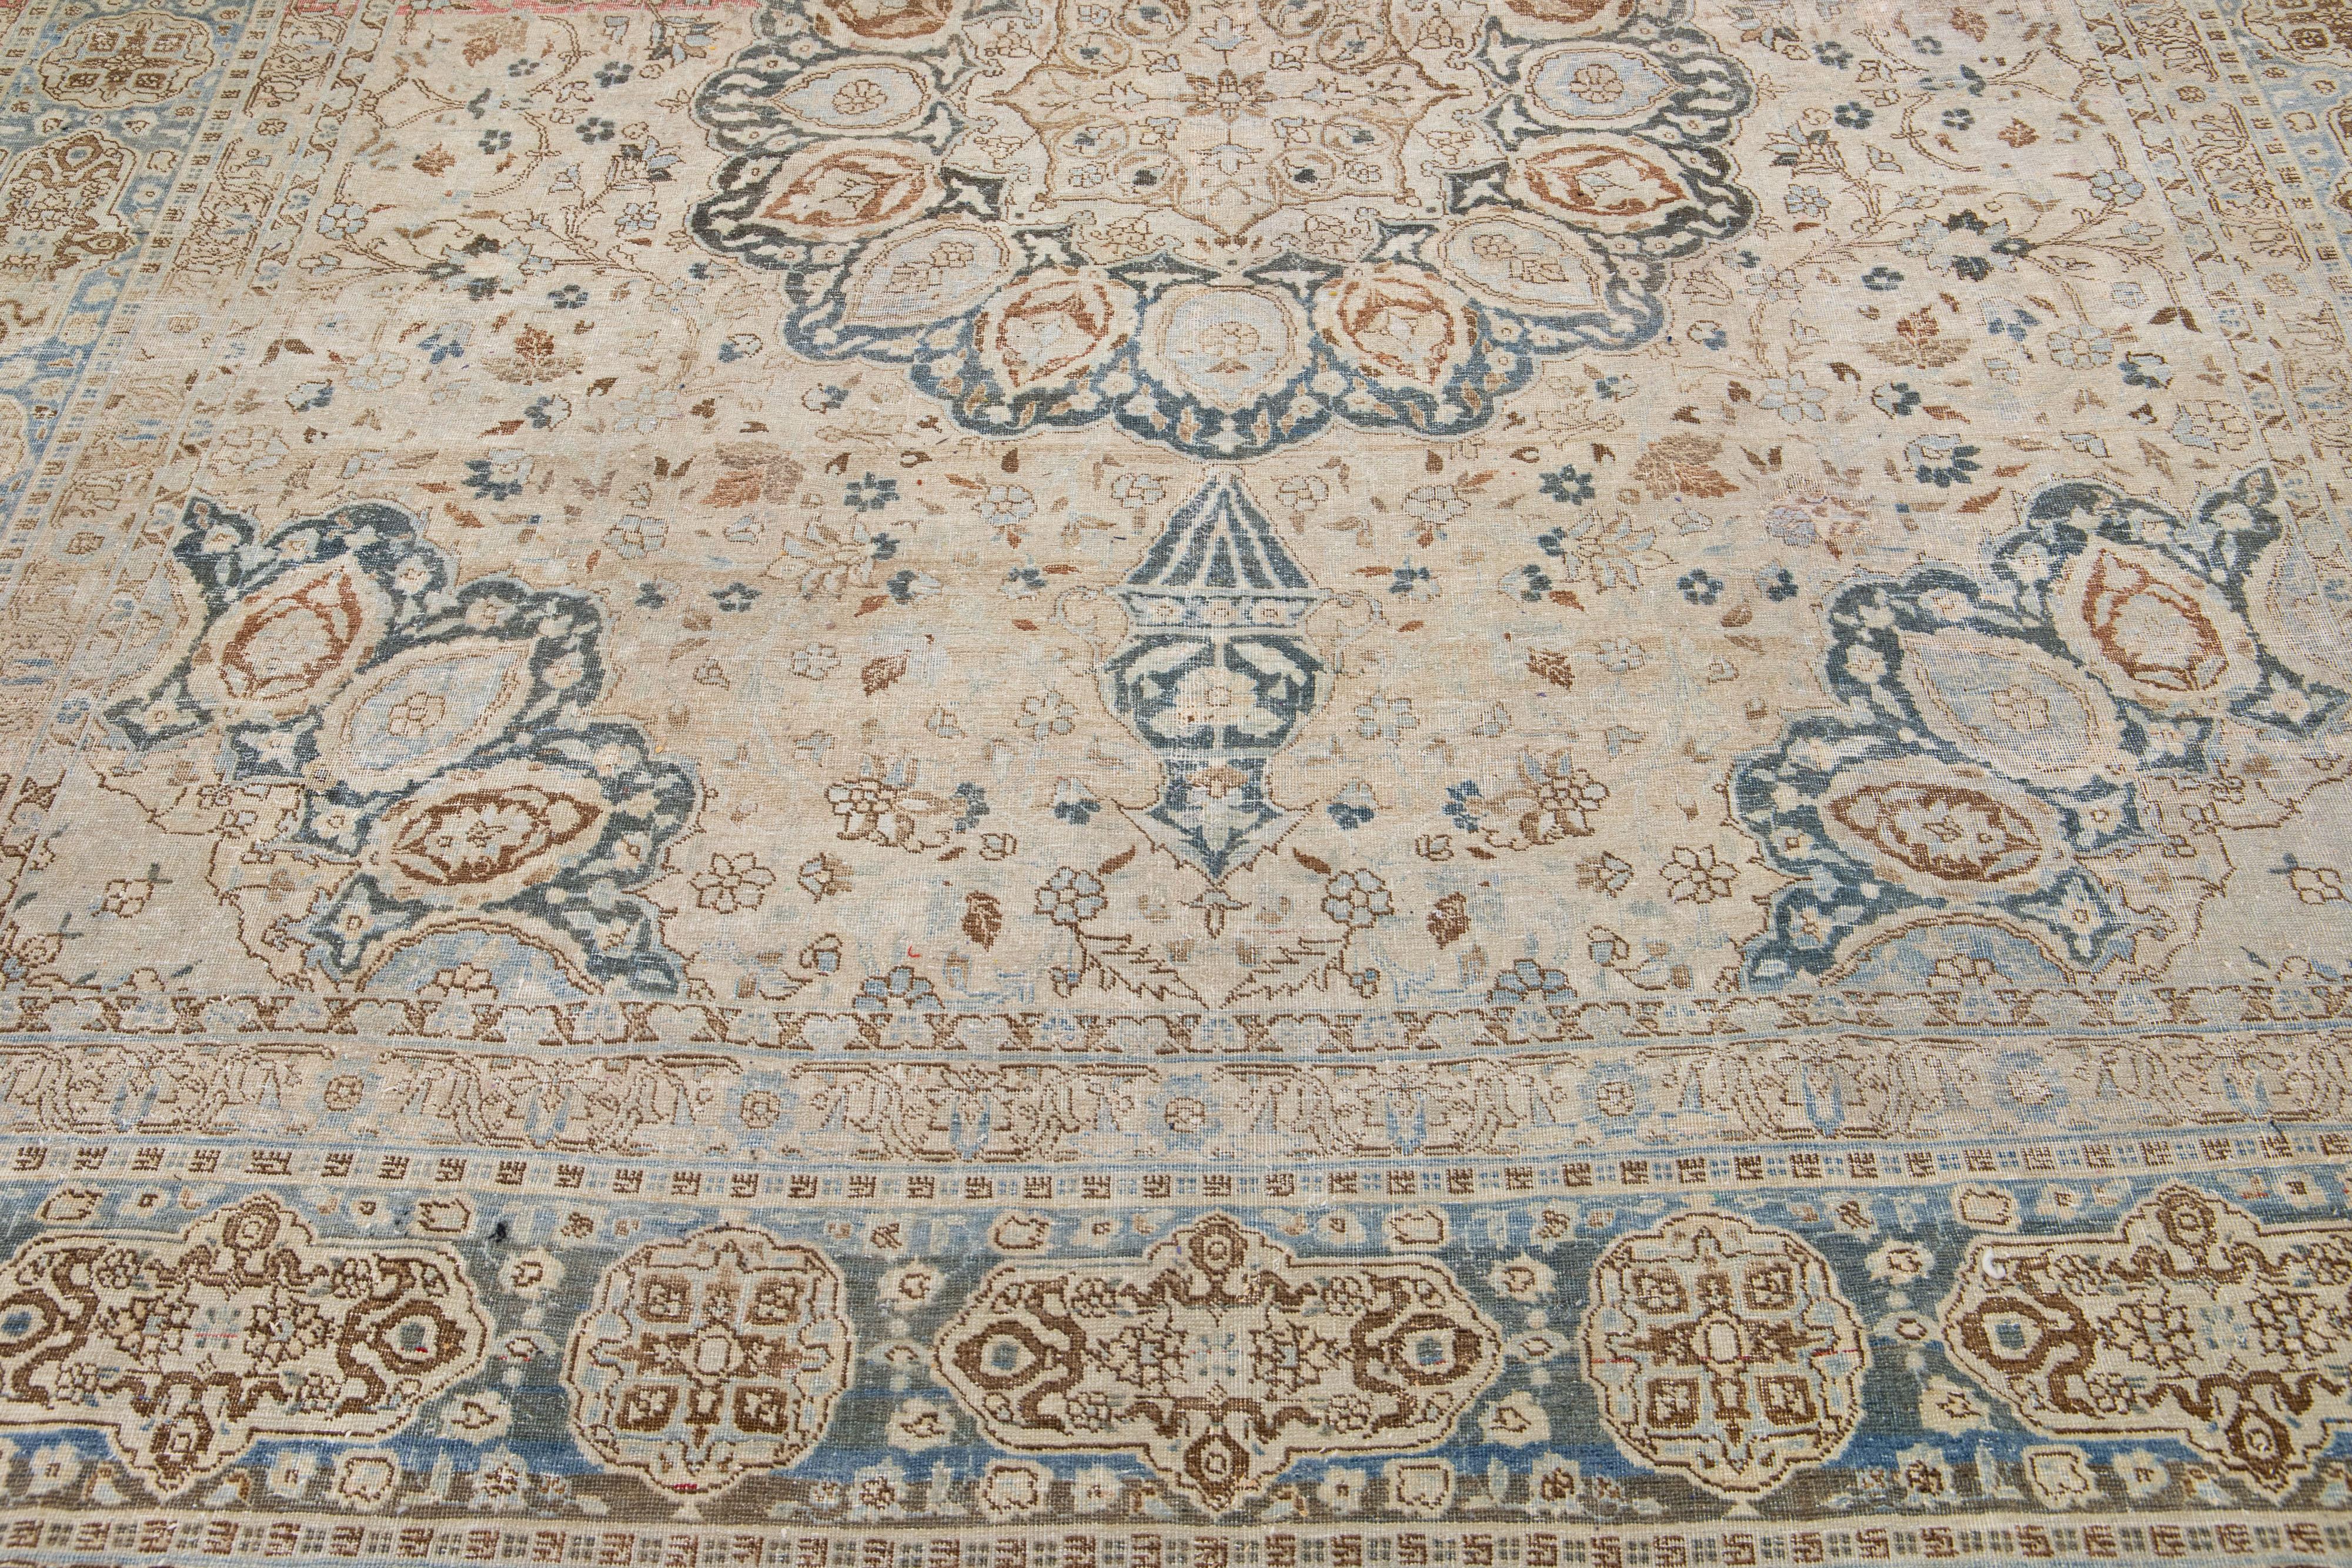 Beautiful antique Persian hand-knotted wool rug with a beige color field. This piece has a blue-designed frame with blue and brown accents in a gorgeous medallion design.

This rug measures: 9' x 11'6